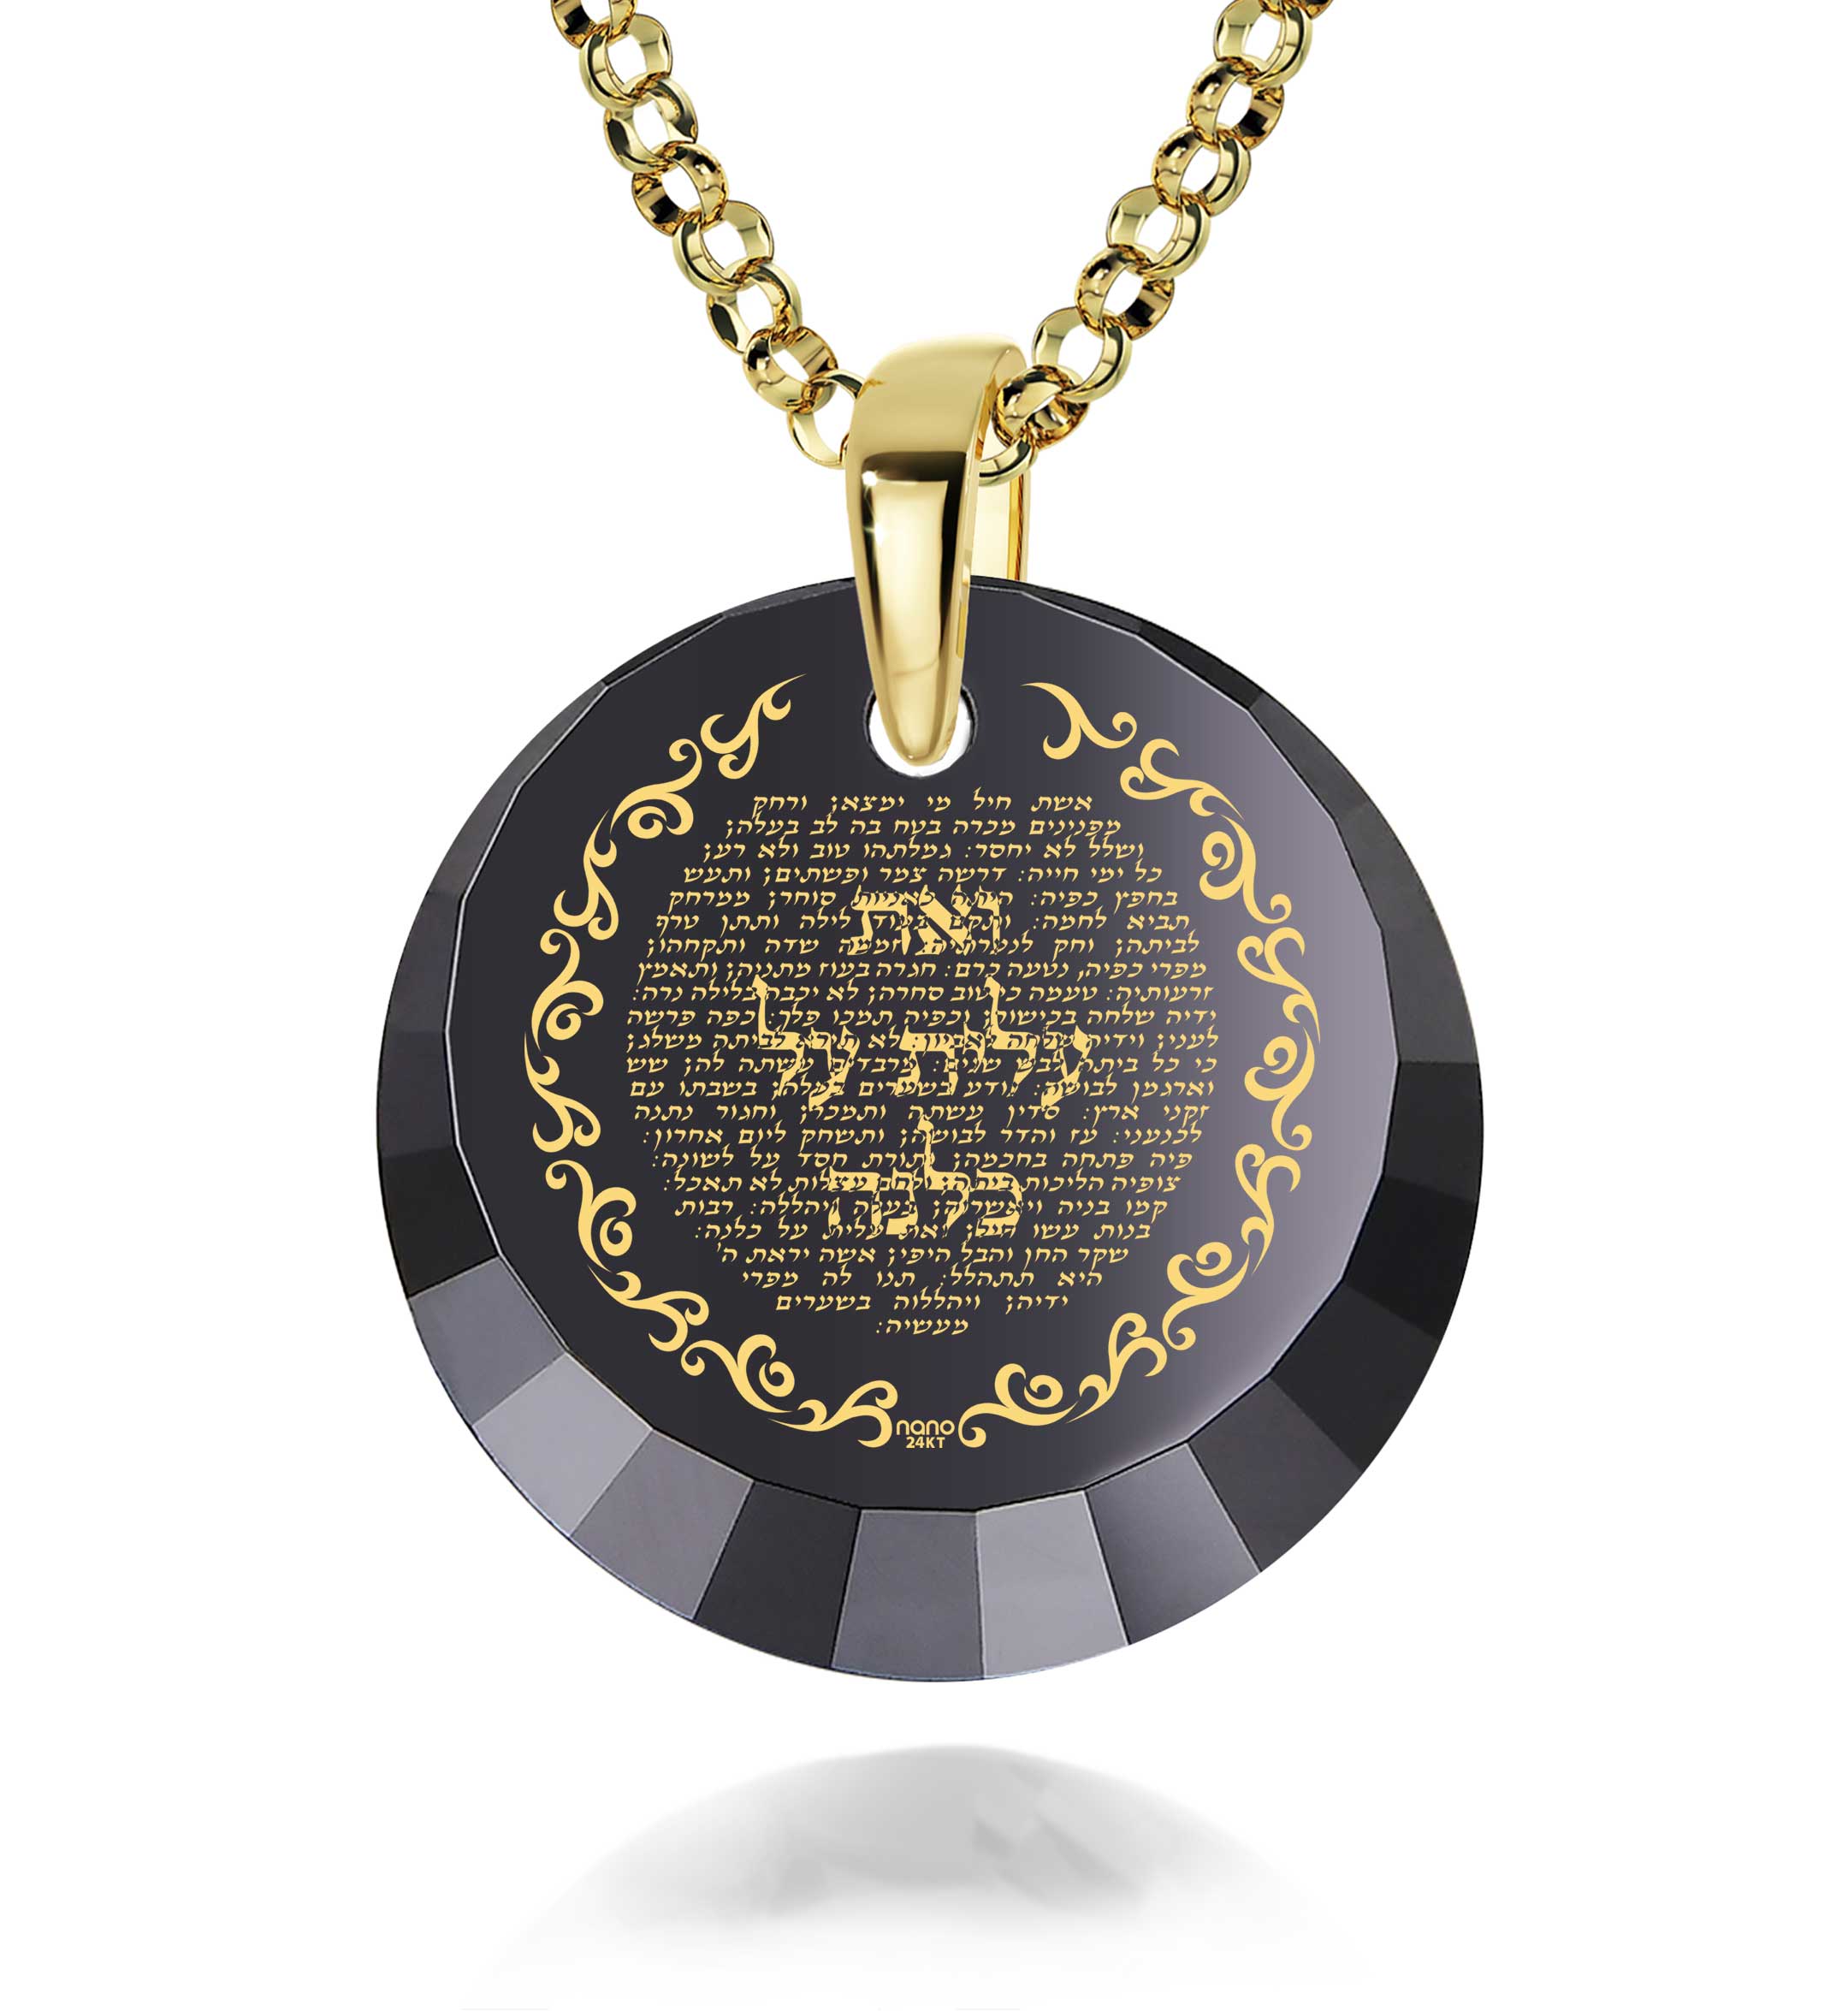 Close-up of a woman wearing a white t-shirt and an Eshet Chayil Hebrew Necklace Jewish Pendant for Women 24k Gold Inscribed, with dimensions of the pendant displayed.